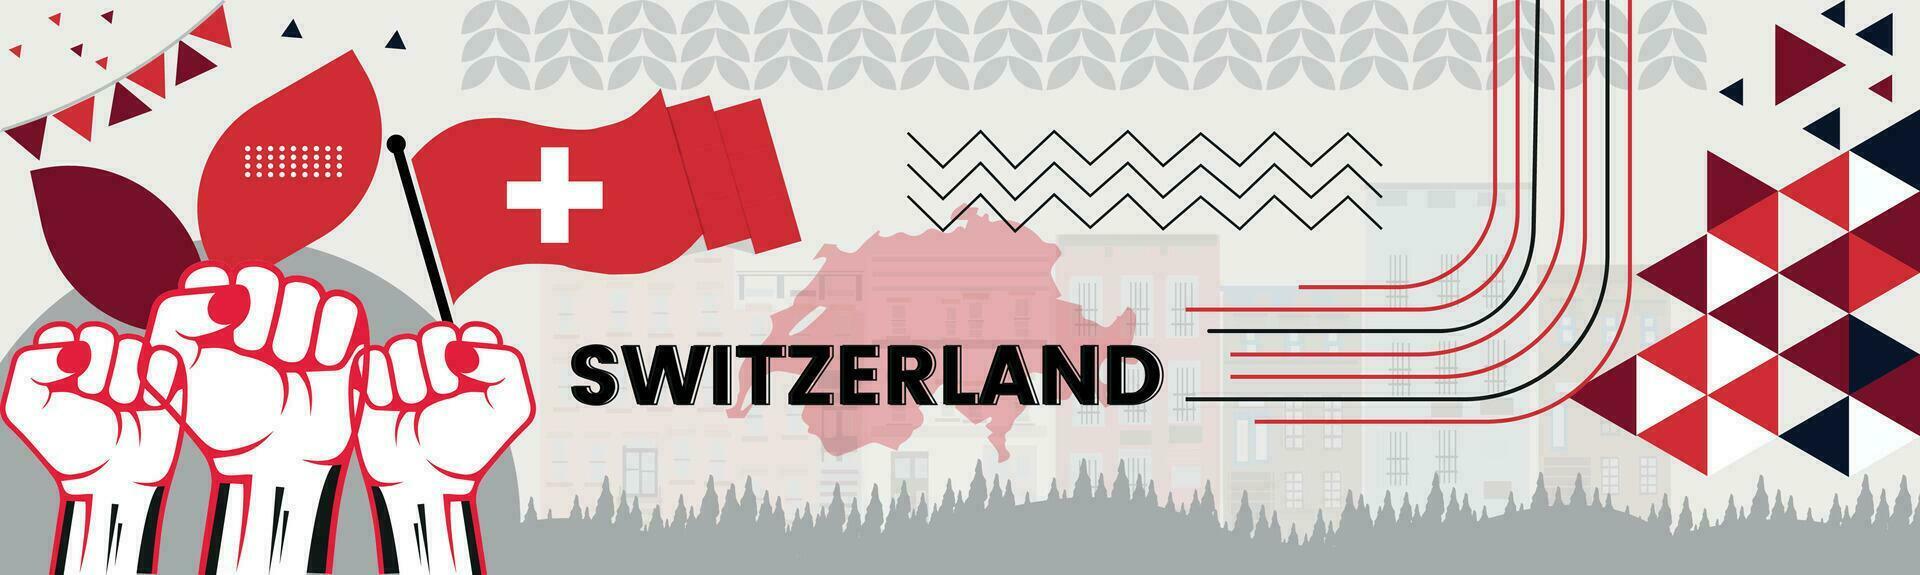 SWITZERLAND Map and raised fists. National day or Independence day design for SWITZERLAND celebration. Modern retro design with abstract icons. Vector illustration.